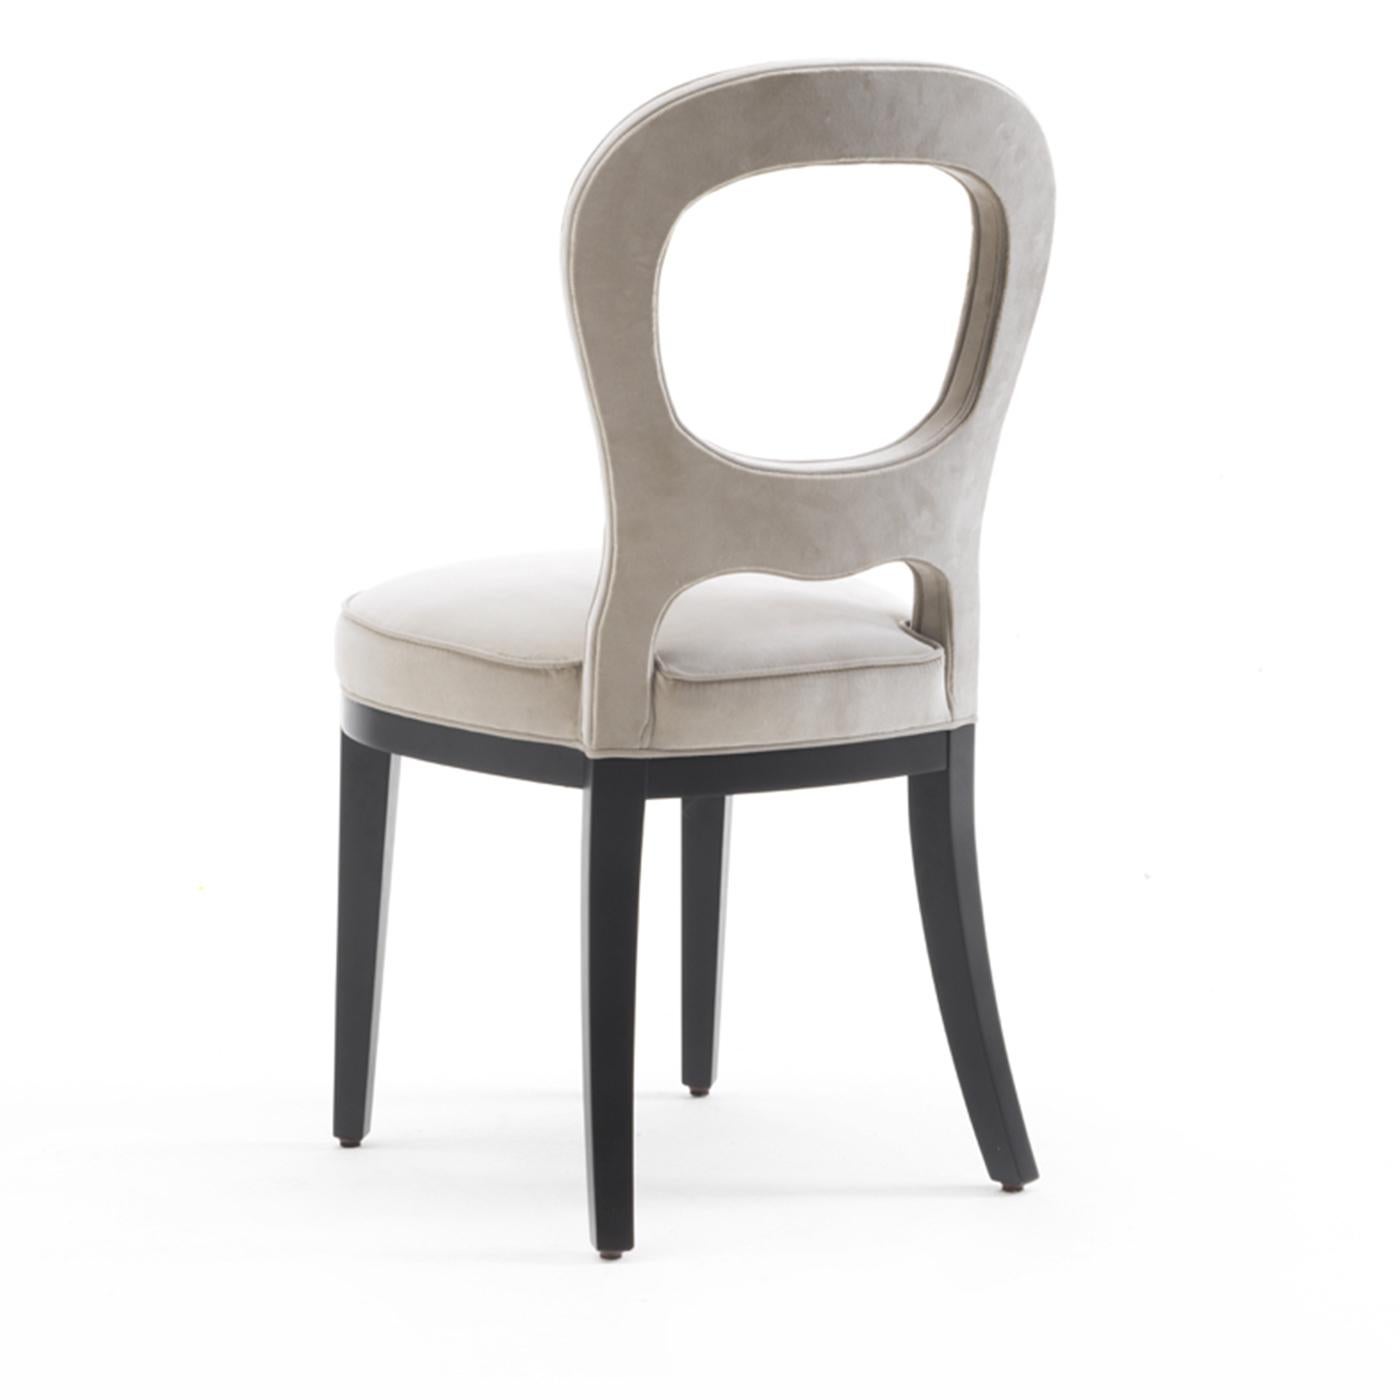 This exquisite chair combines a sinuous silhouette with comfortable seating experience. Either behind a desk in a study, as an accent piece in an entryway or around a dining table, this chair will be a precious addition to both modern and Classic